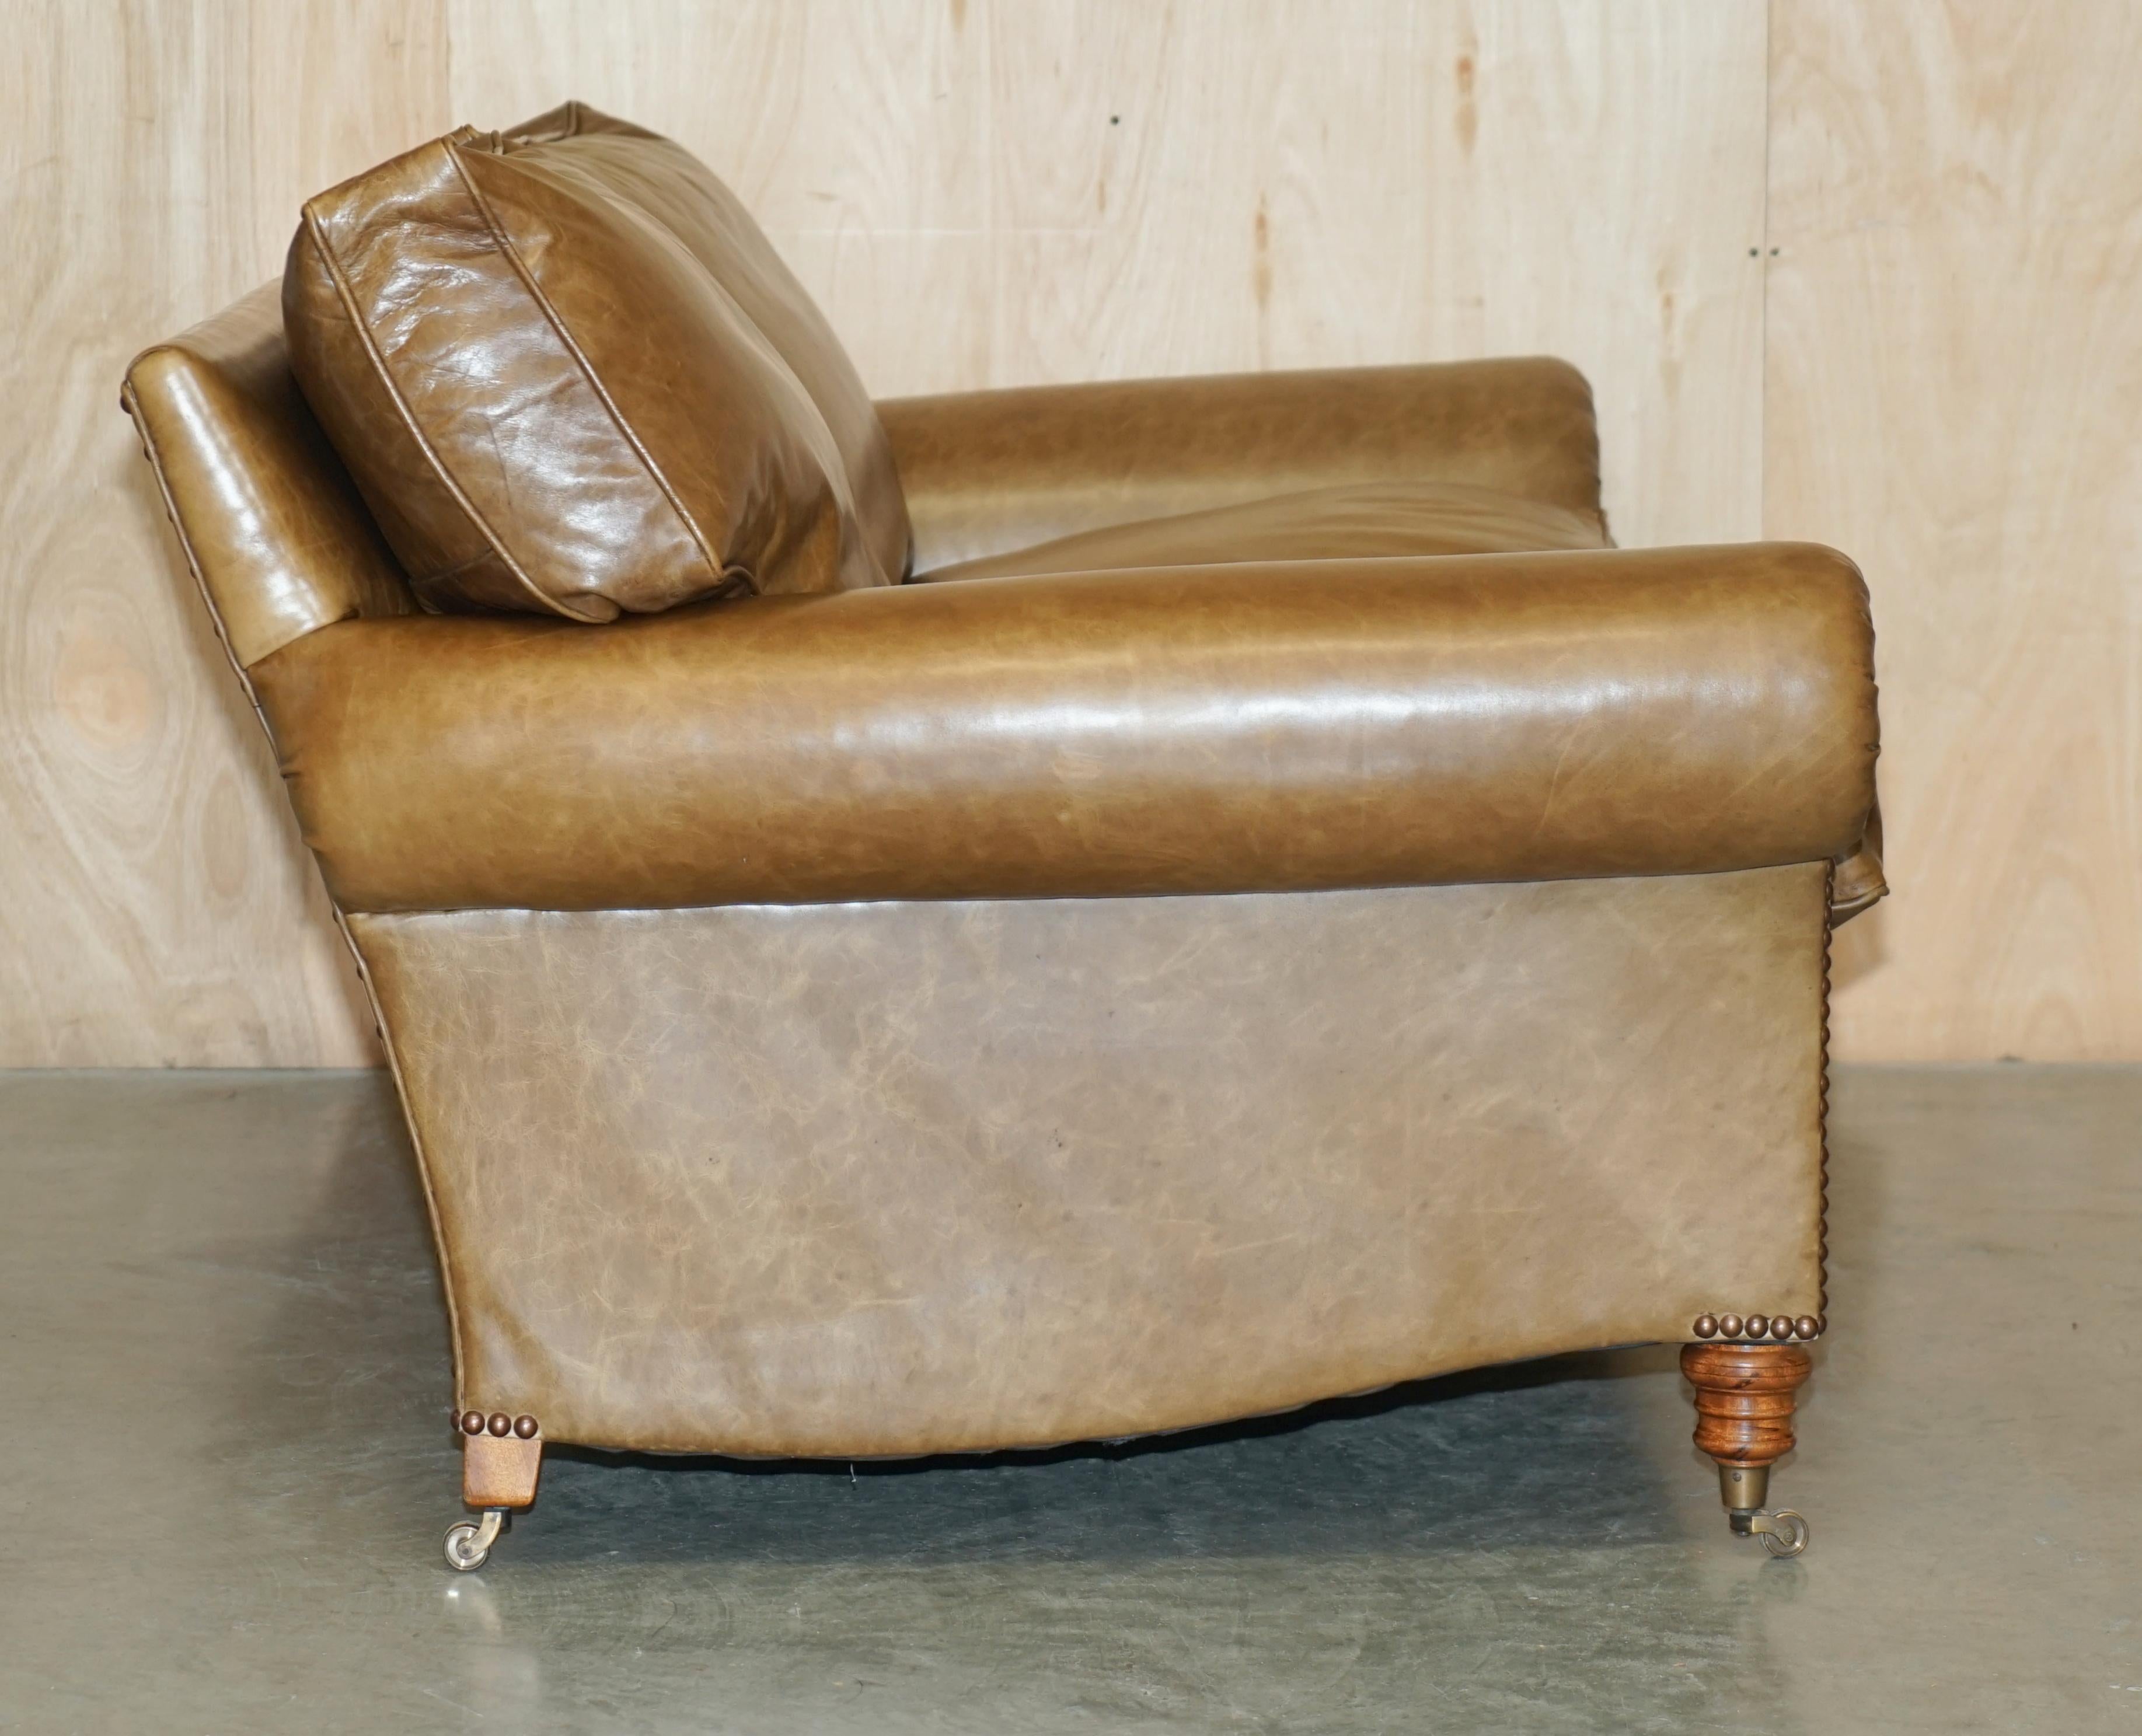 LOVELY GEORGE SMITH SCROLL CUSHiON BACK BROWN LEATHER SOFA en vente 10